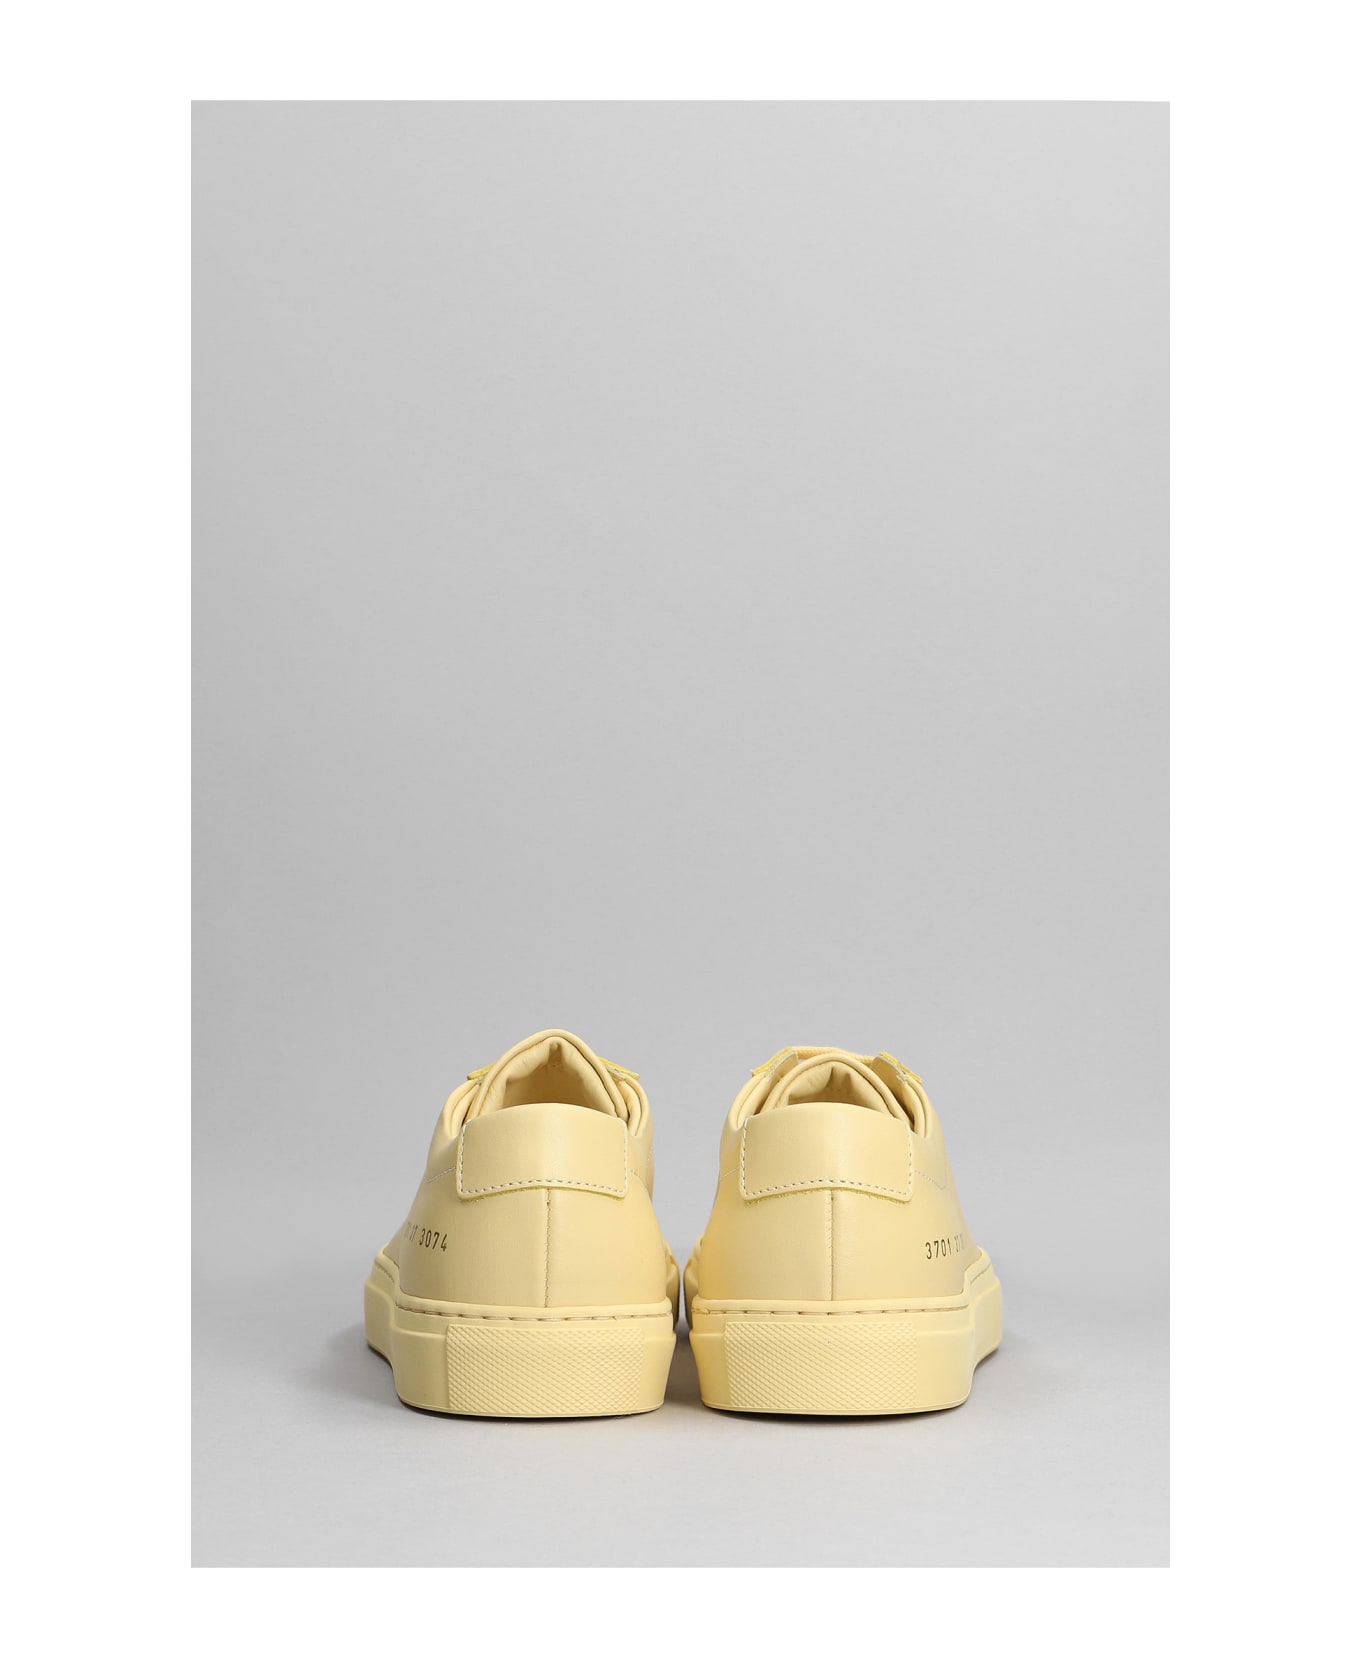 Common Projects Achille Sneakers In Yellow Leather - Yellow スニーカー